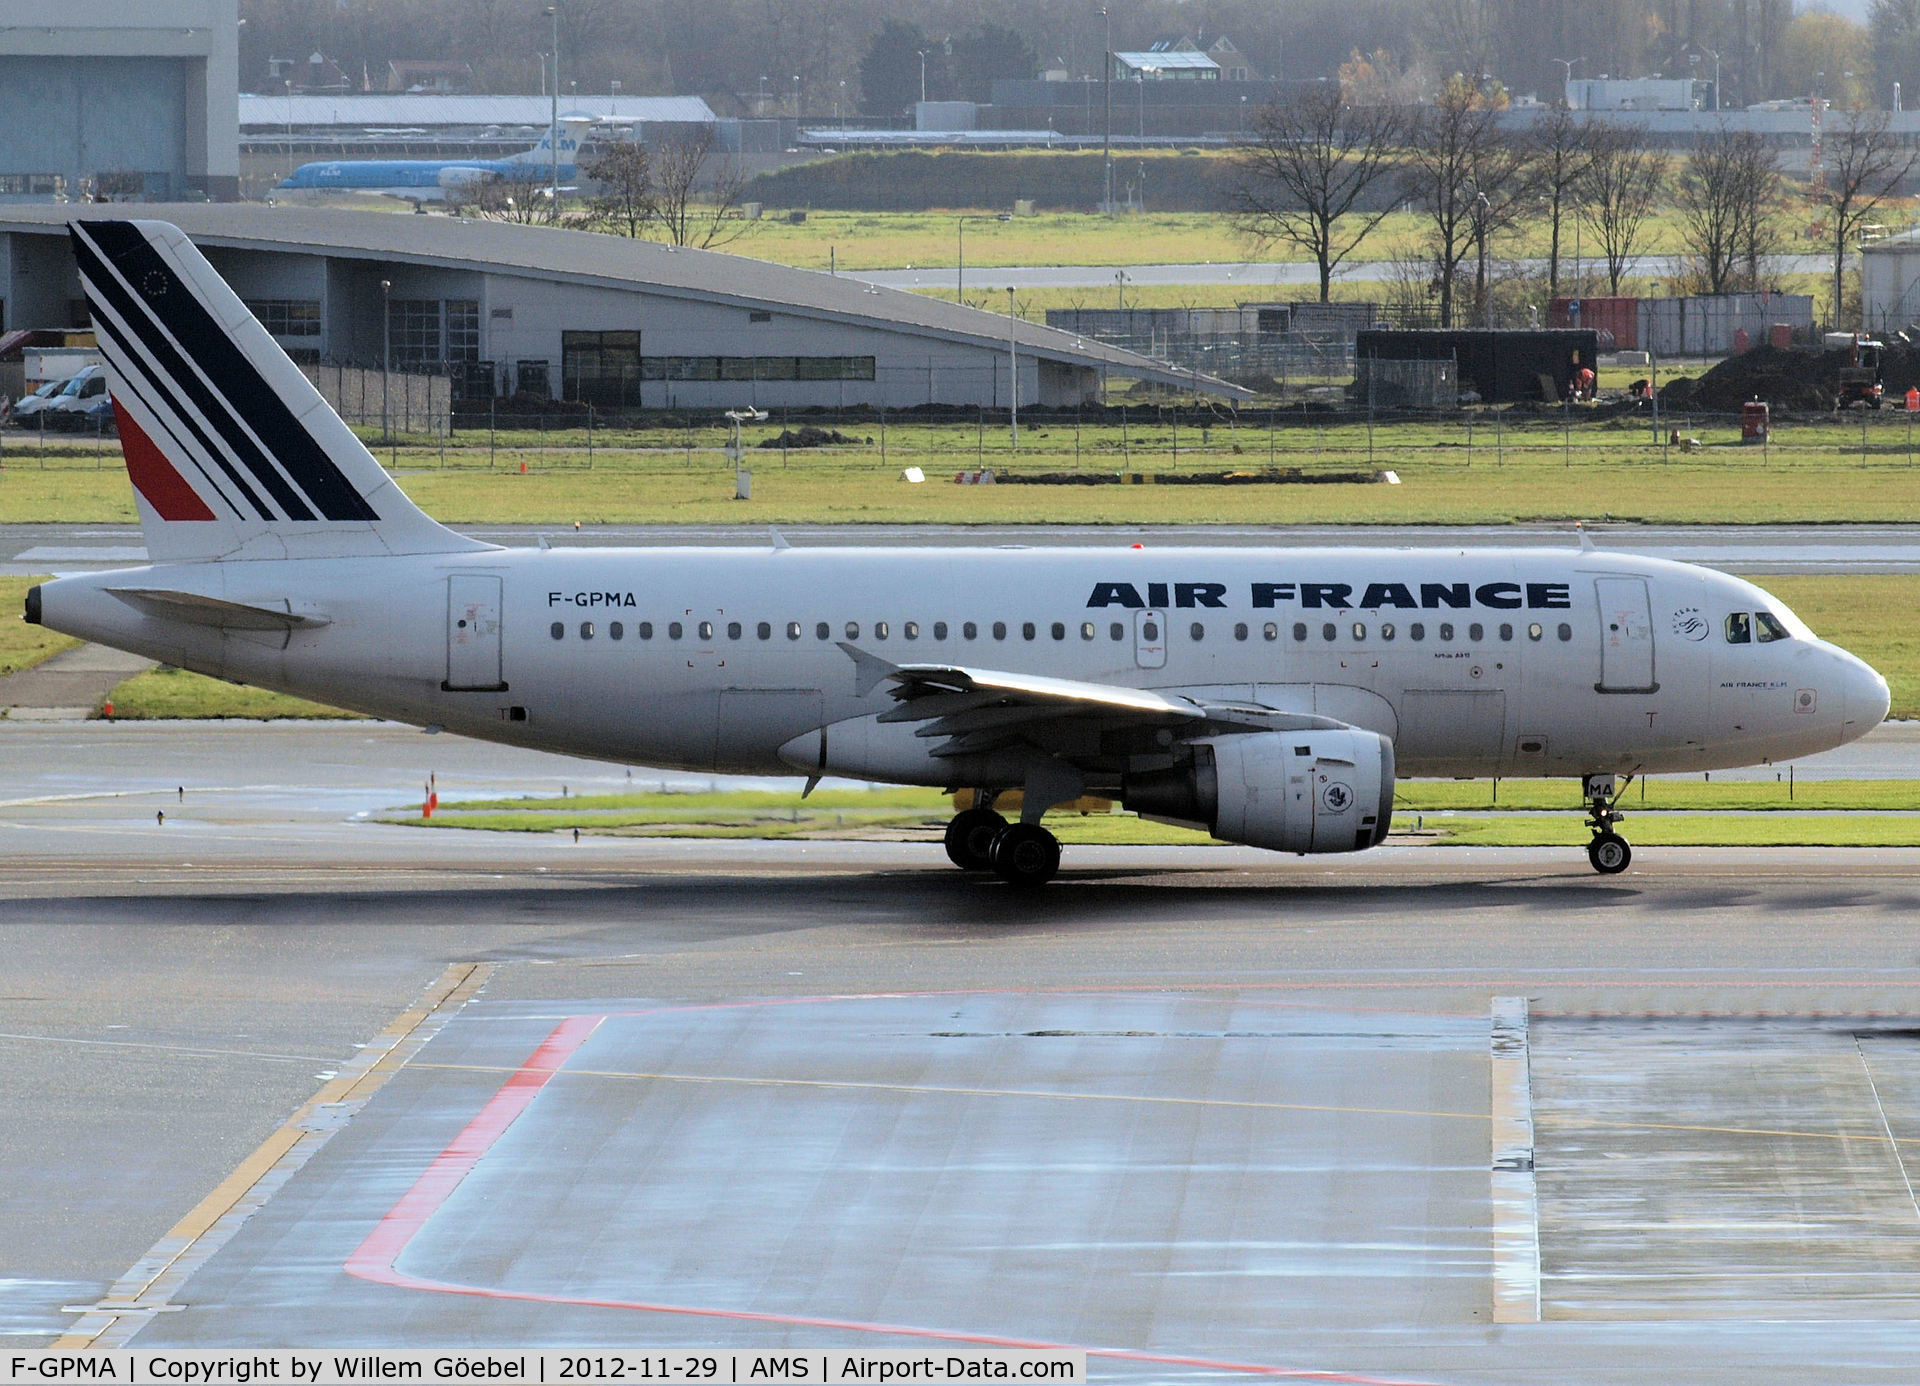 F-GPMA, 1998 Airbus A319-113 C/N 598, Taxi to runway C36 of Schiphol Airport